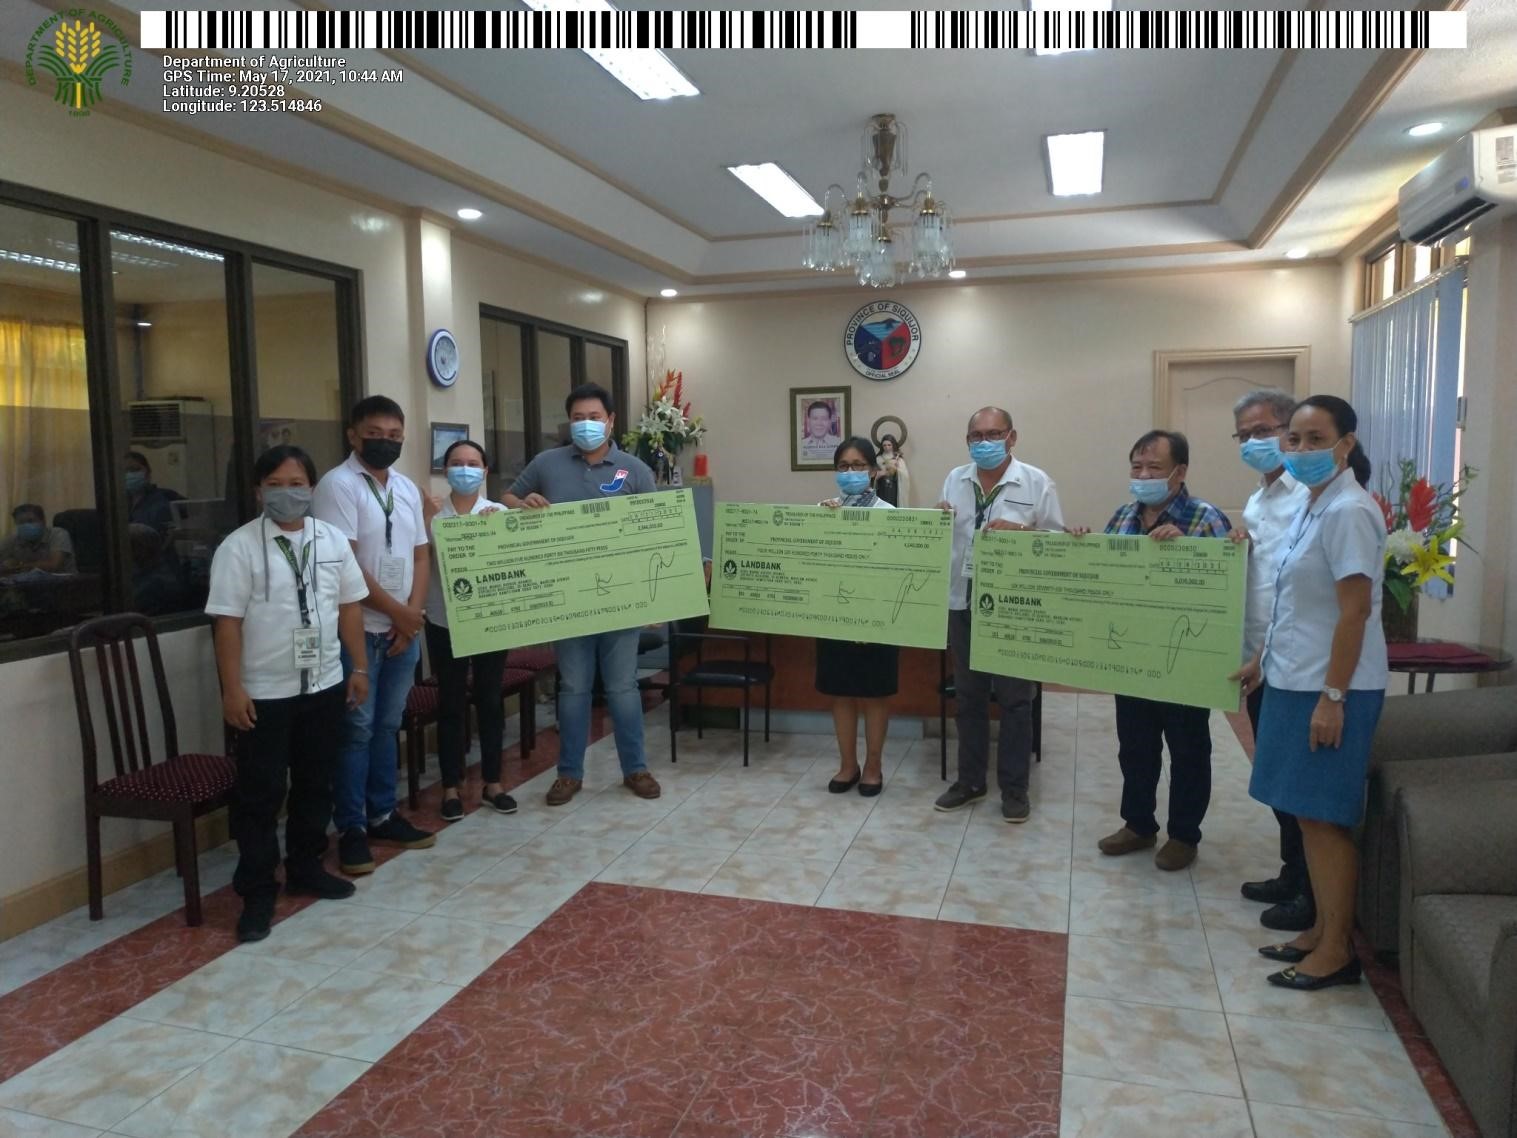 DA-SAAD turns over Php 10.7M to boost poultry and livestock in Siquijor